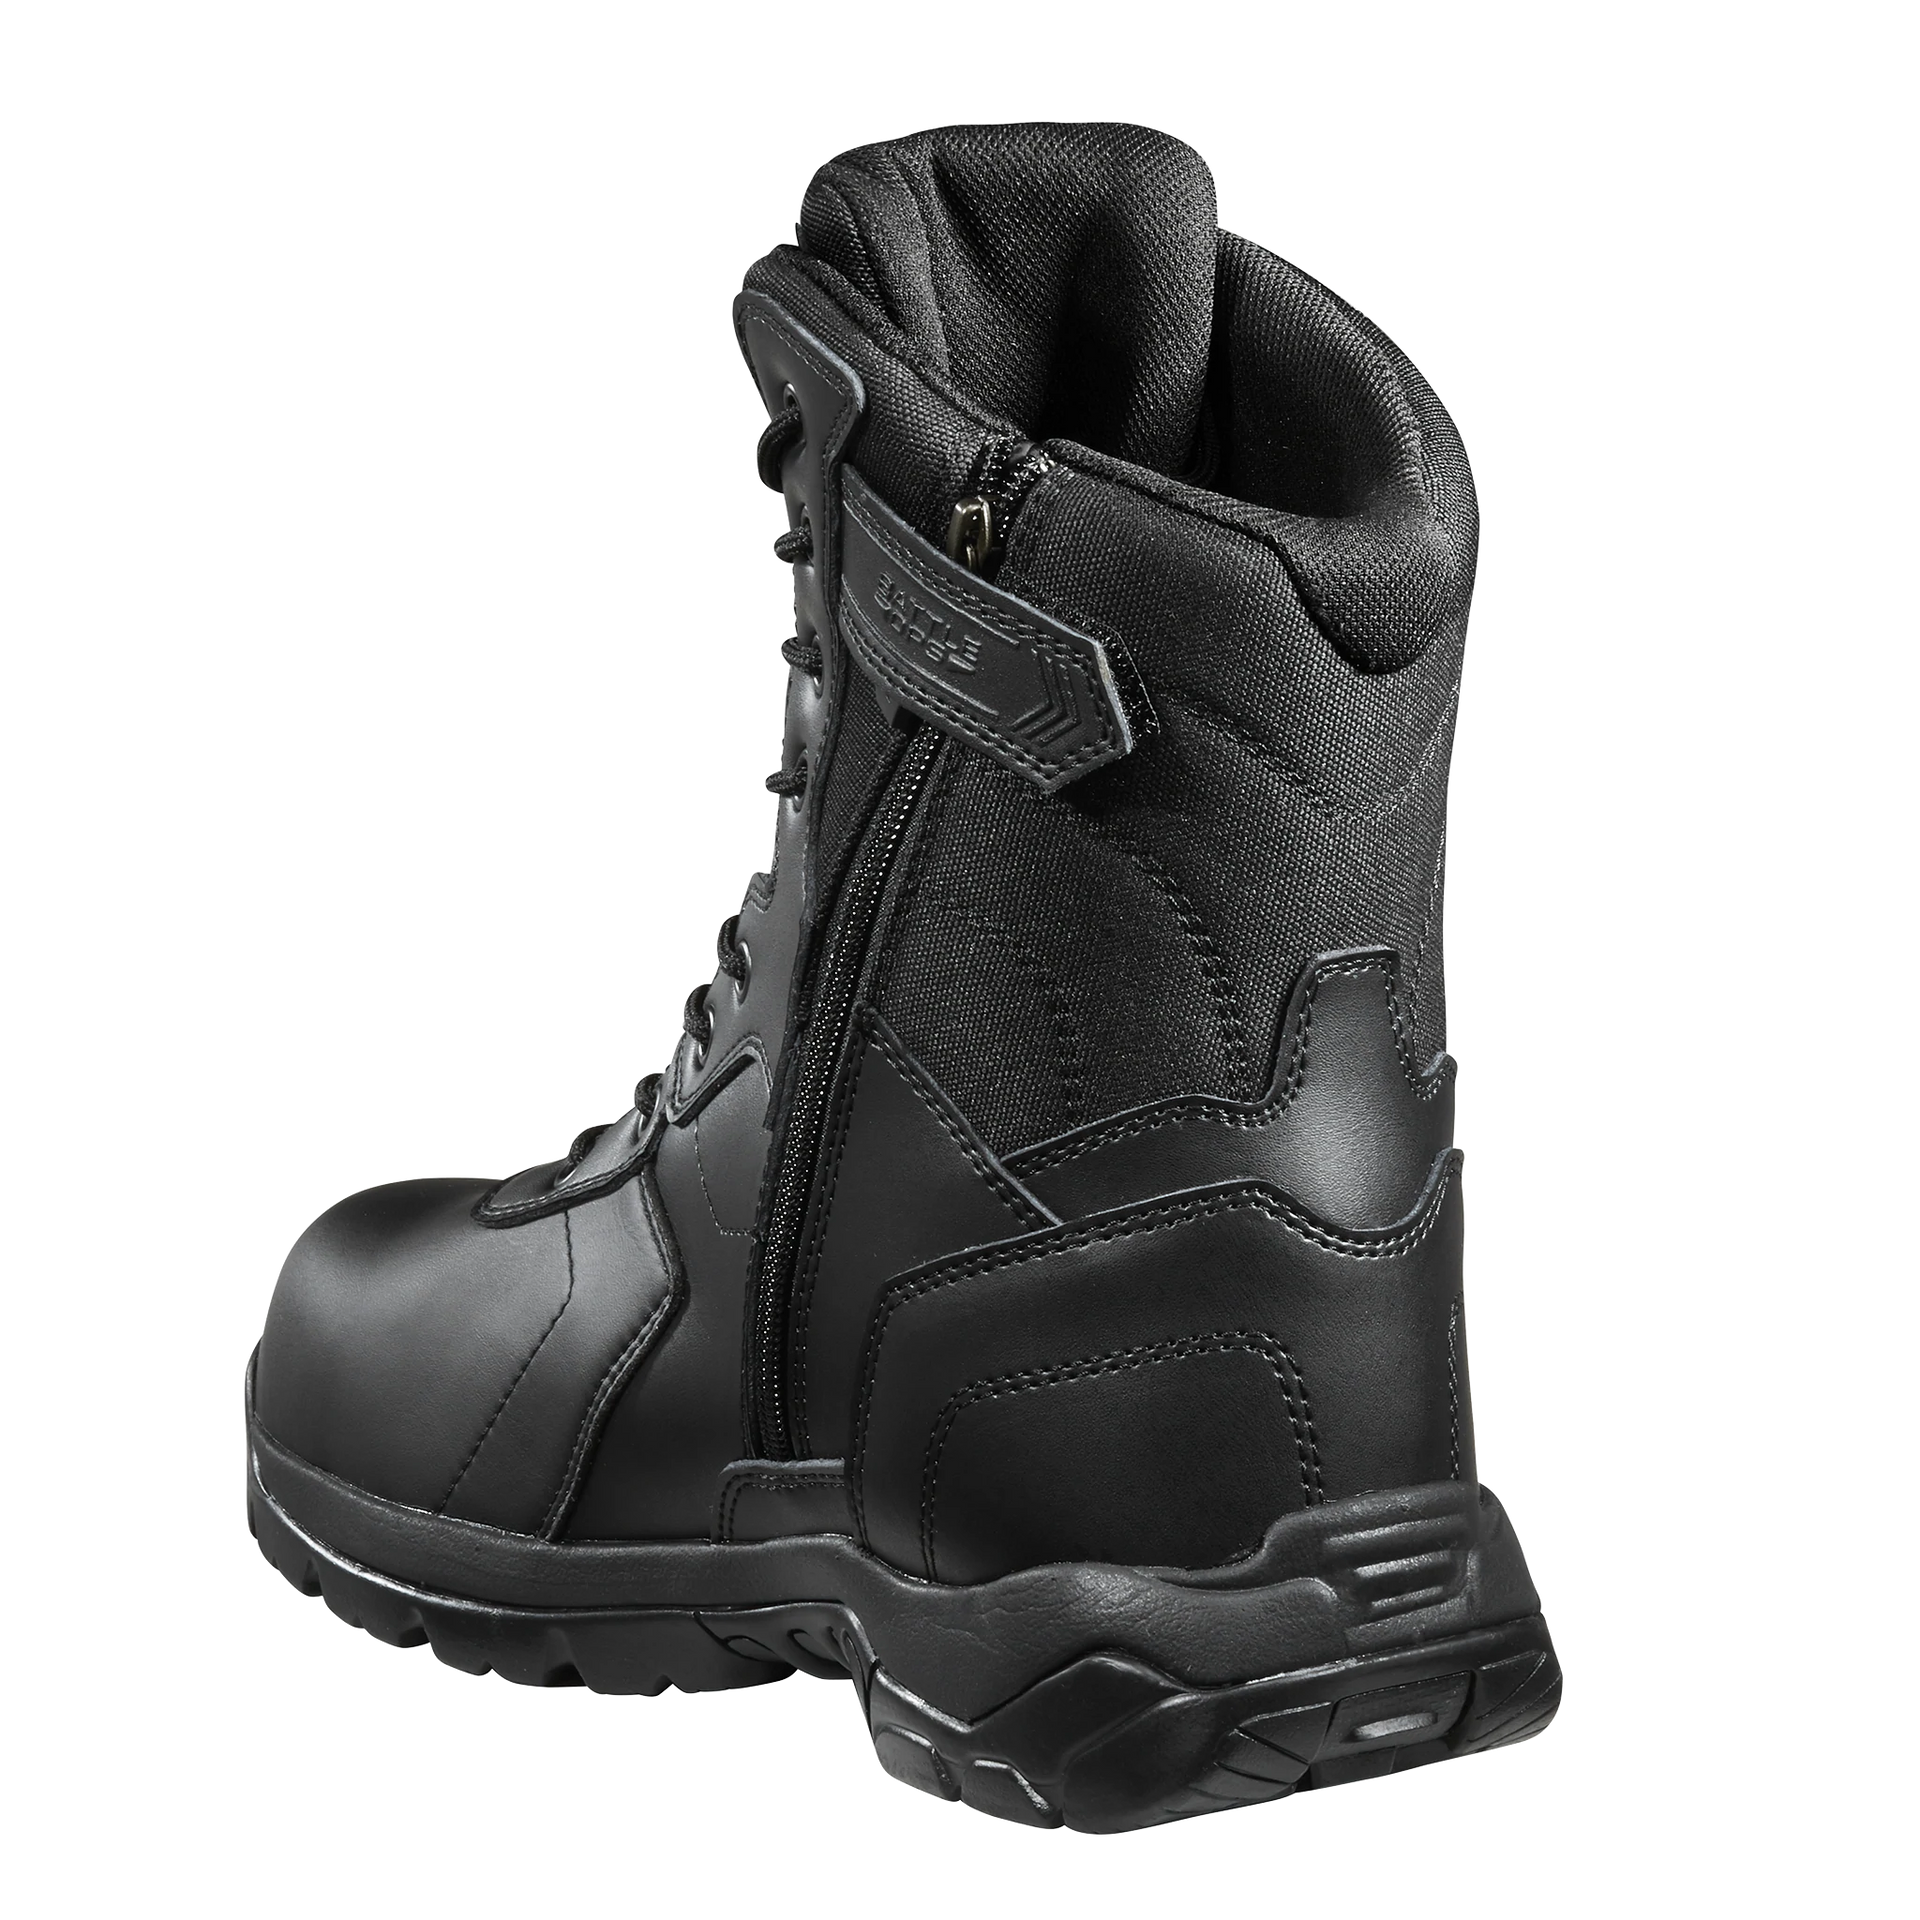 Black Diamond Battle Ops 8-inch Side Zip Tactical Boot | The Fire Center | The Fire Store | Store | Fuego Fire Center | Firefighter Gear | Our men's waterproof tactical boot is light and flexible. The EVA mid-sole provides shock absorbing comfort while the fiberglass shank offers support and torsional rigidity.  The Battle Ops durable rubber outsole delivers slip resistant traction for any terrain and our removable custom fit footbed provides all day comfort